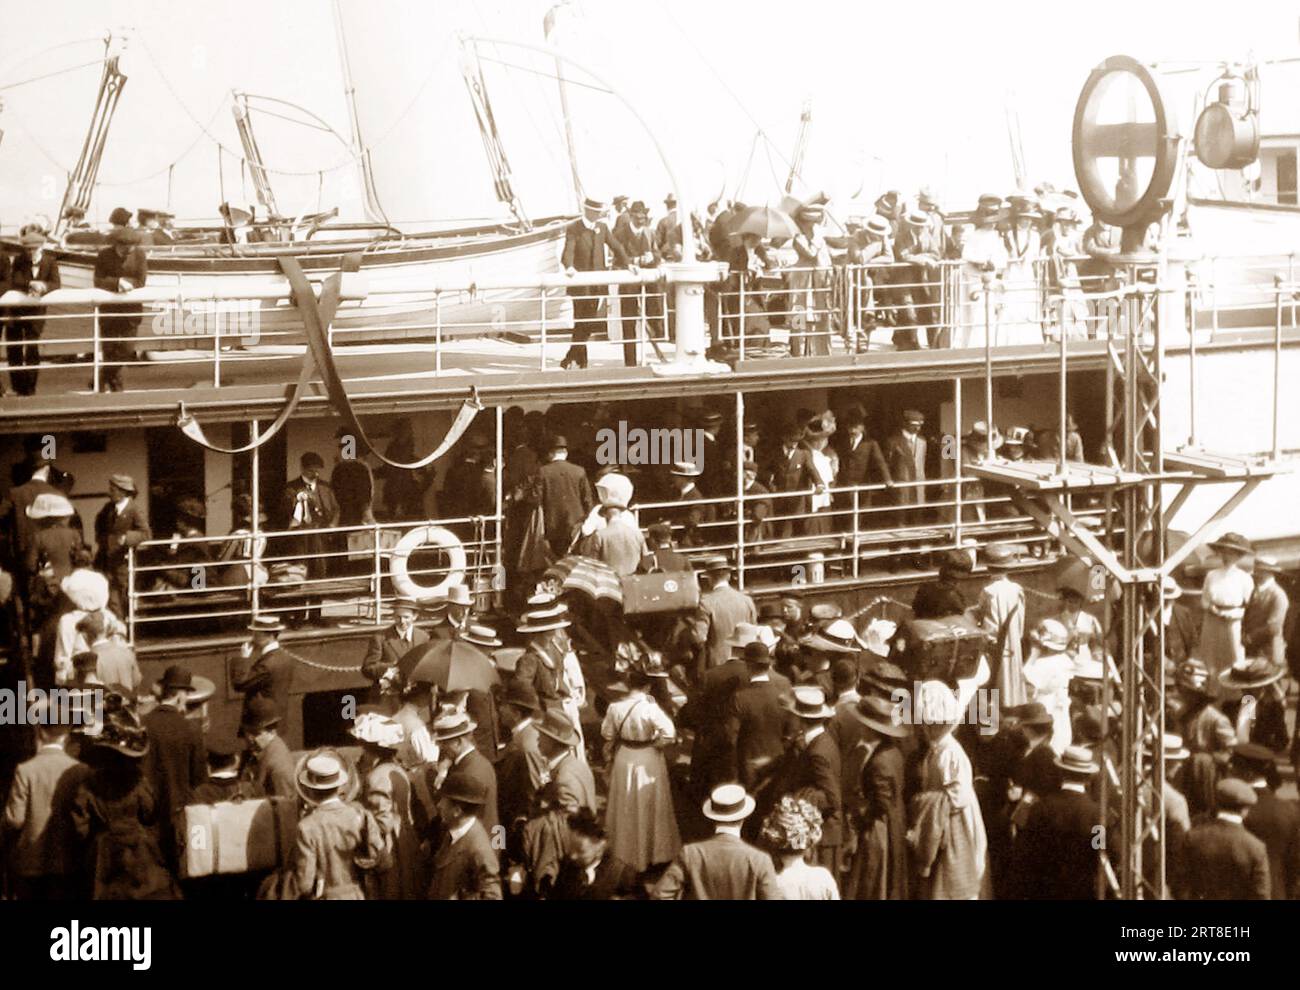 Boarding the SS Victoria ferry at Folkestone, early 1900s Stock Photo